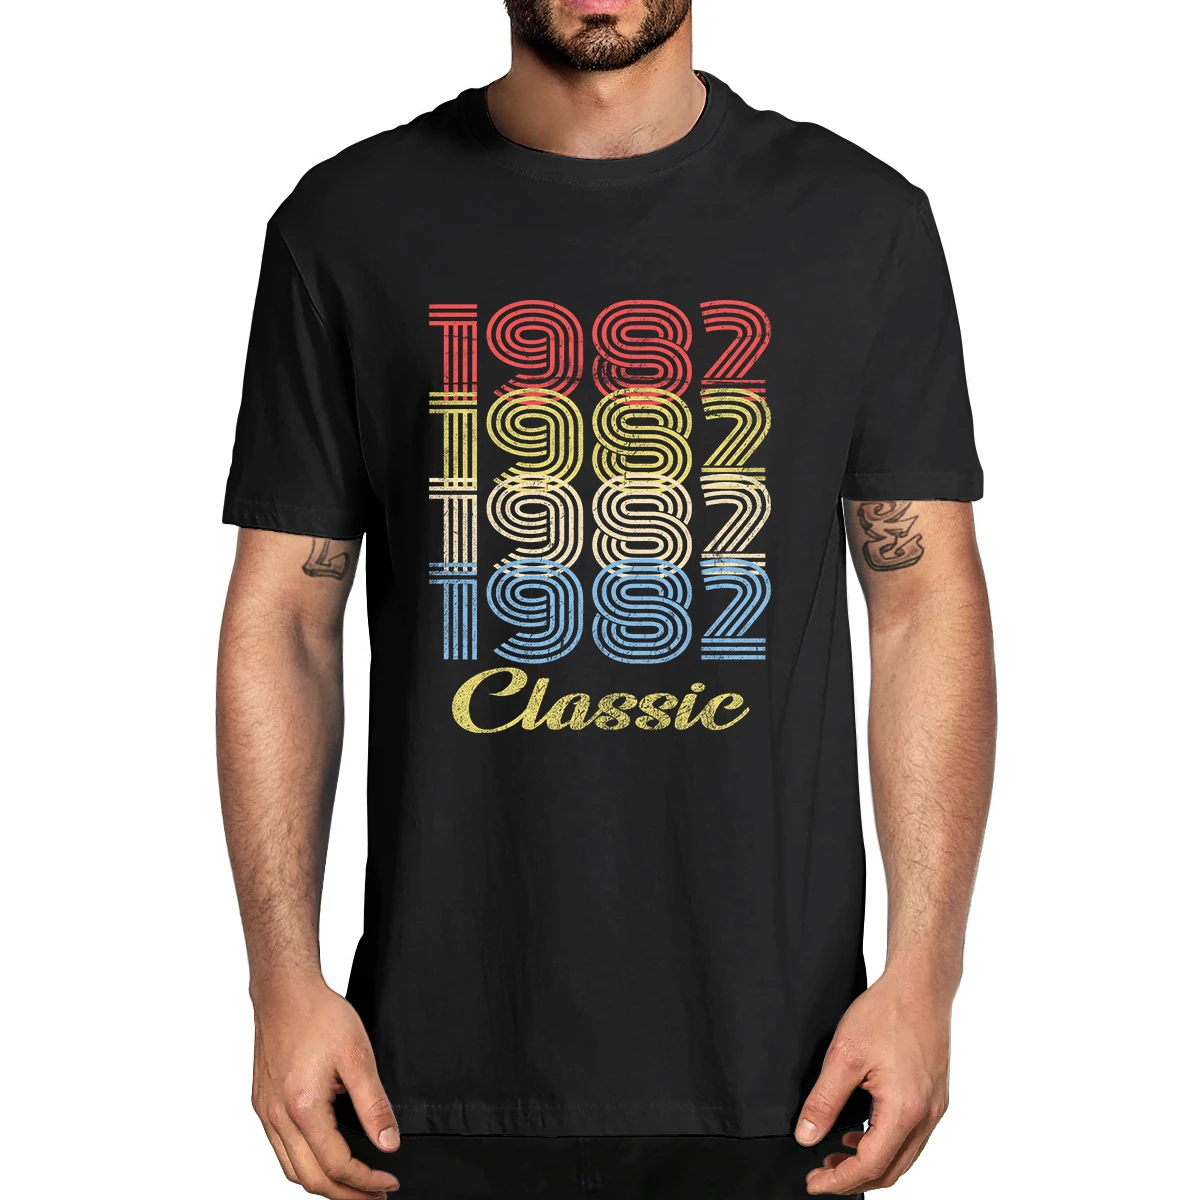 

Best Seller 100% Cotton Men Clothing 40th Birthday Gift Vintage 1982 Classic Men's Novelty T-Shirt Casual Oversized Unisex Tee